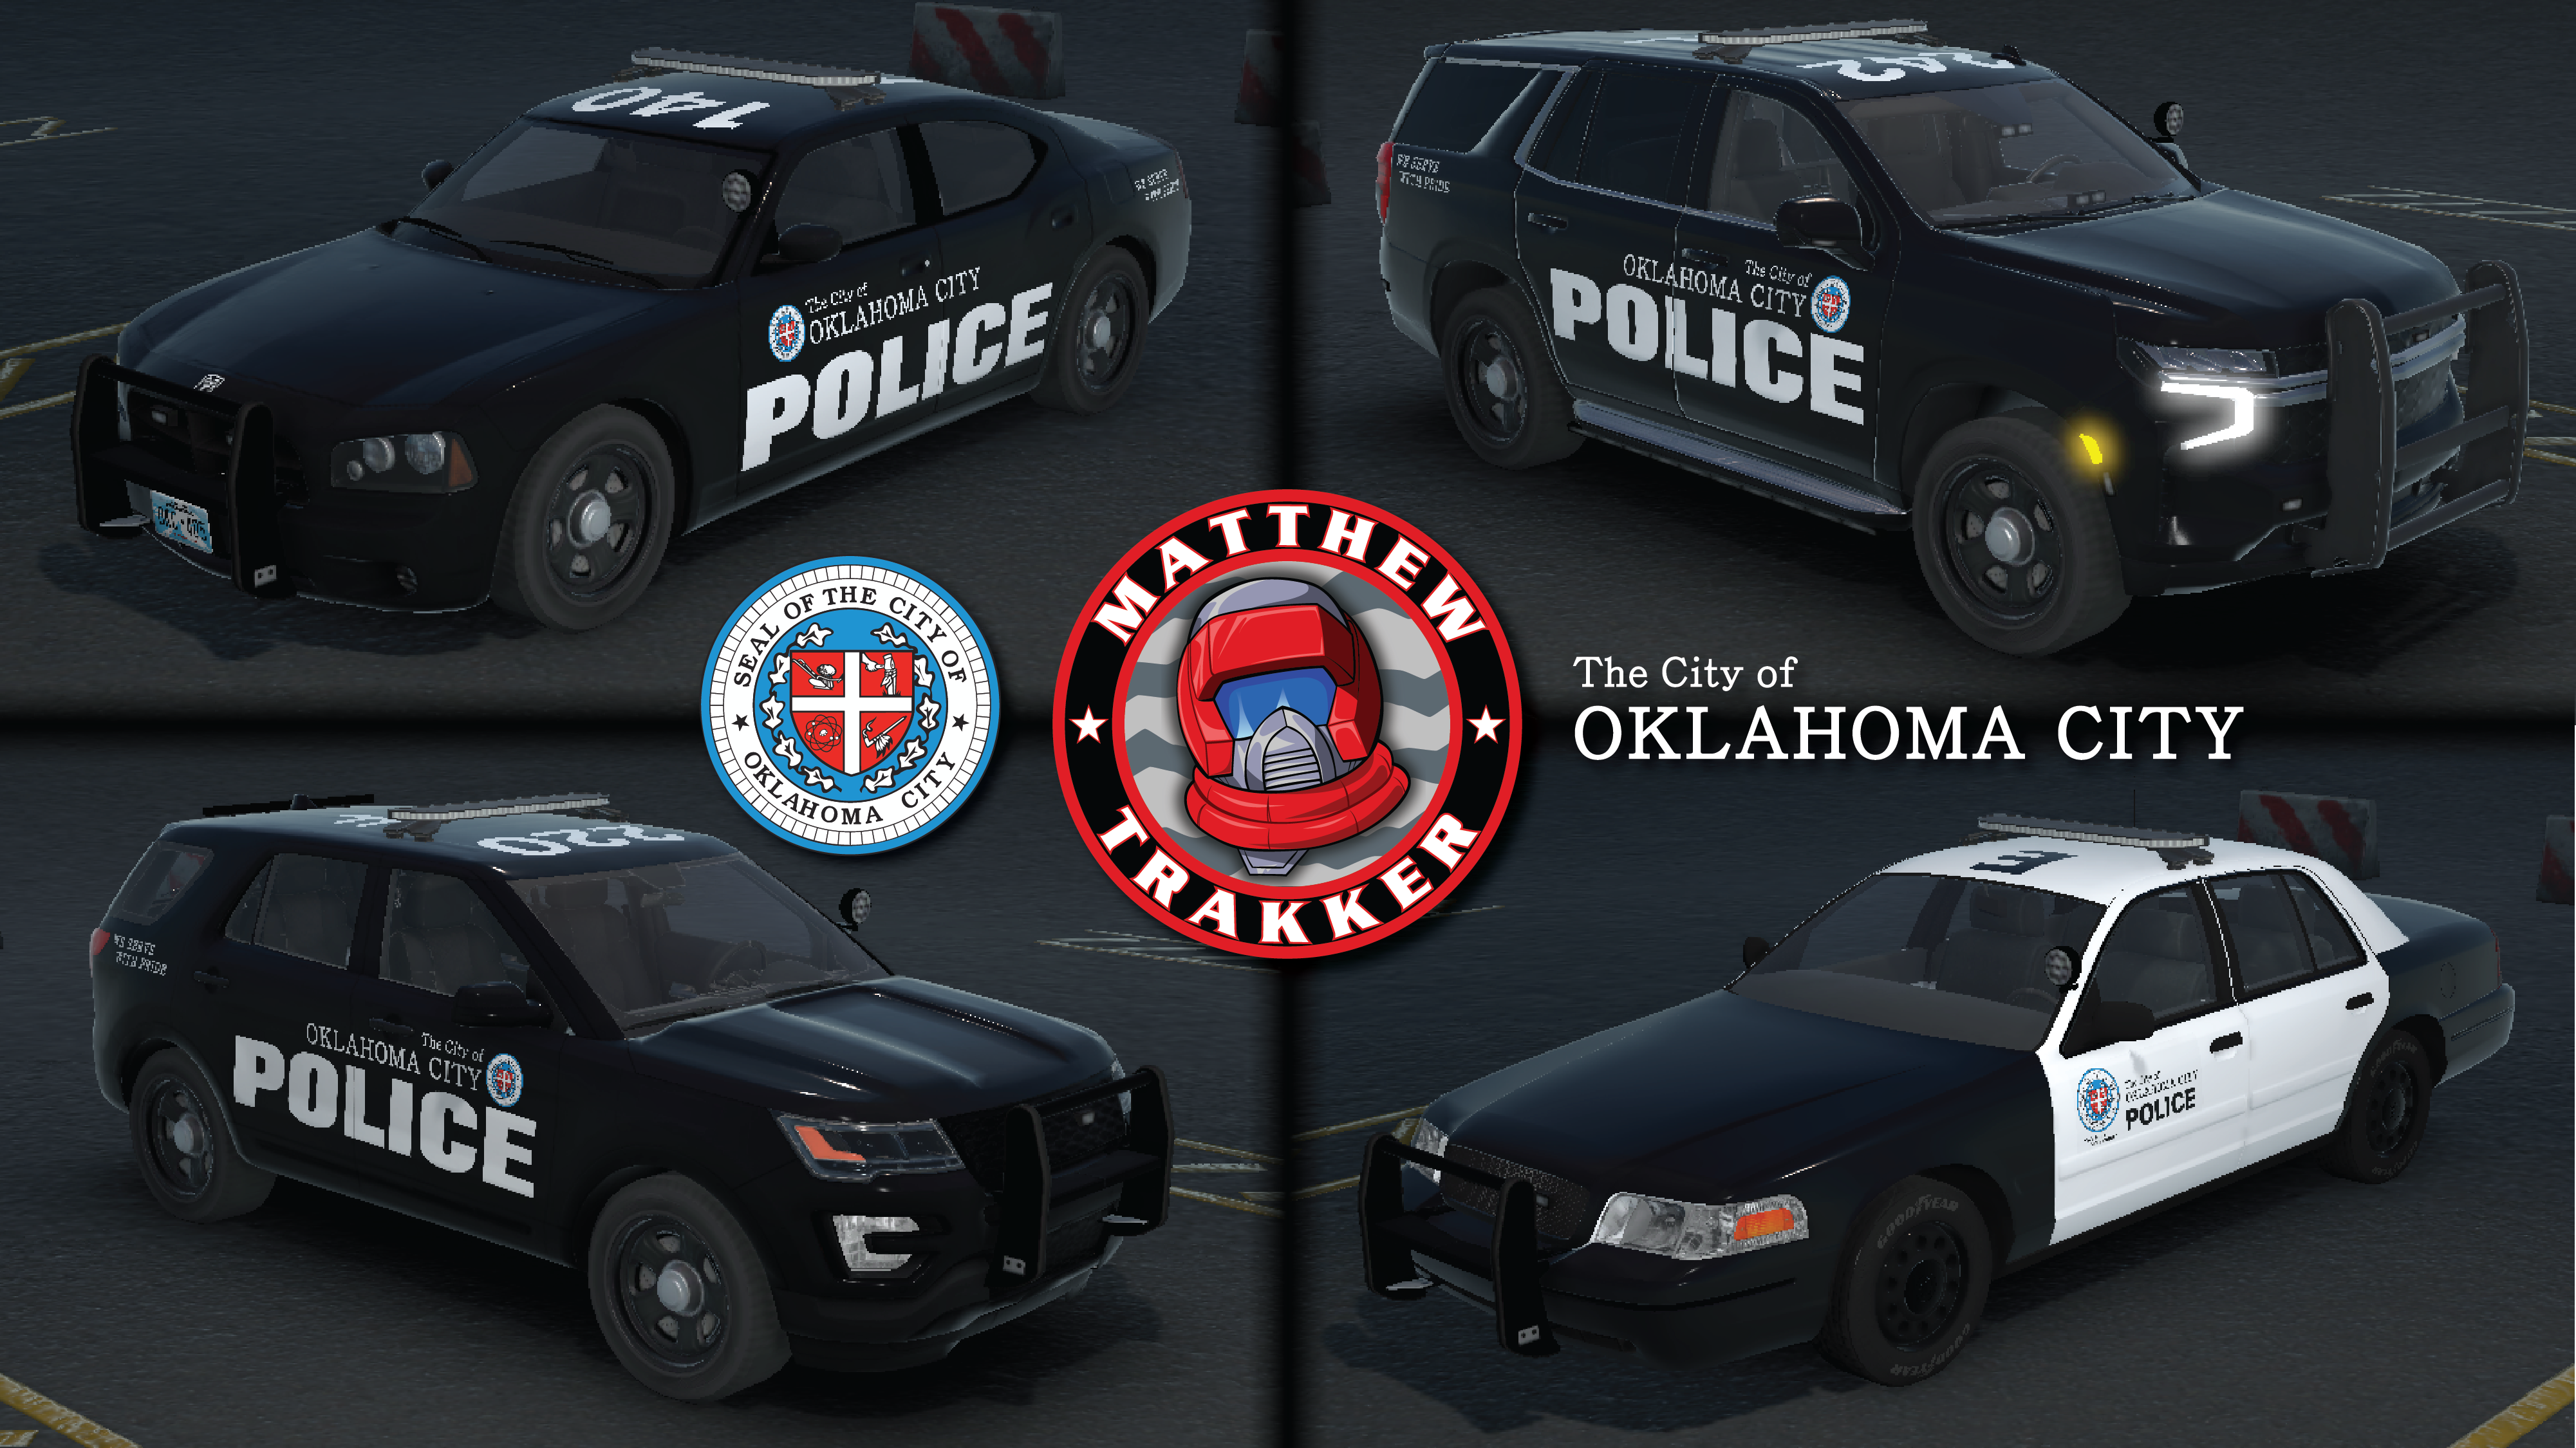 More information about "Oklahoma City Police Department Vehicles - OKC, OK"